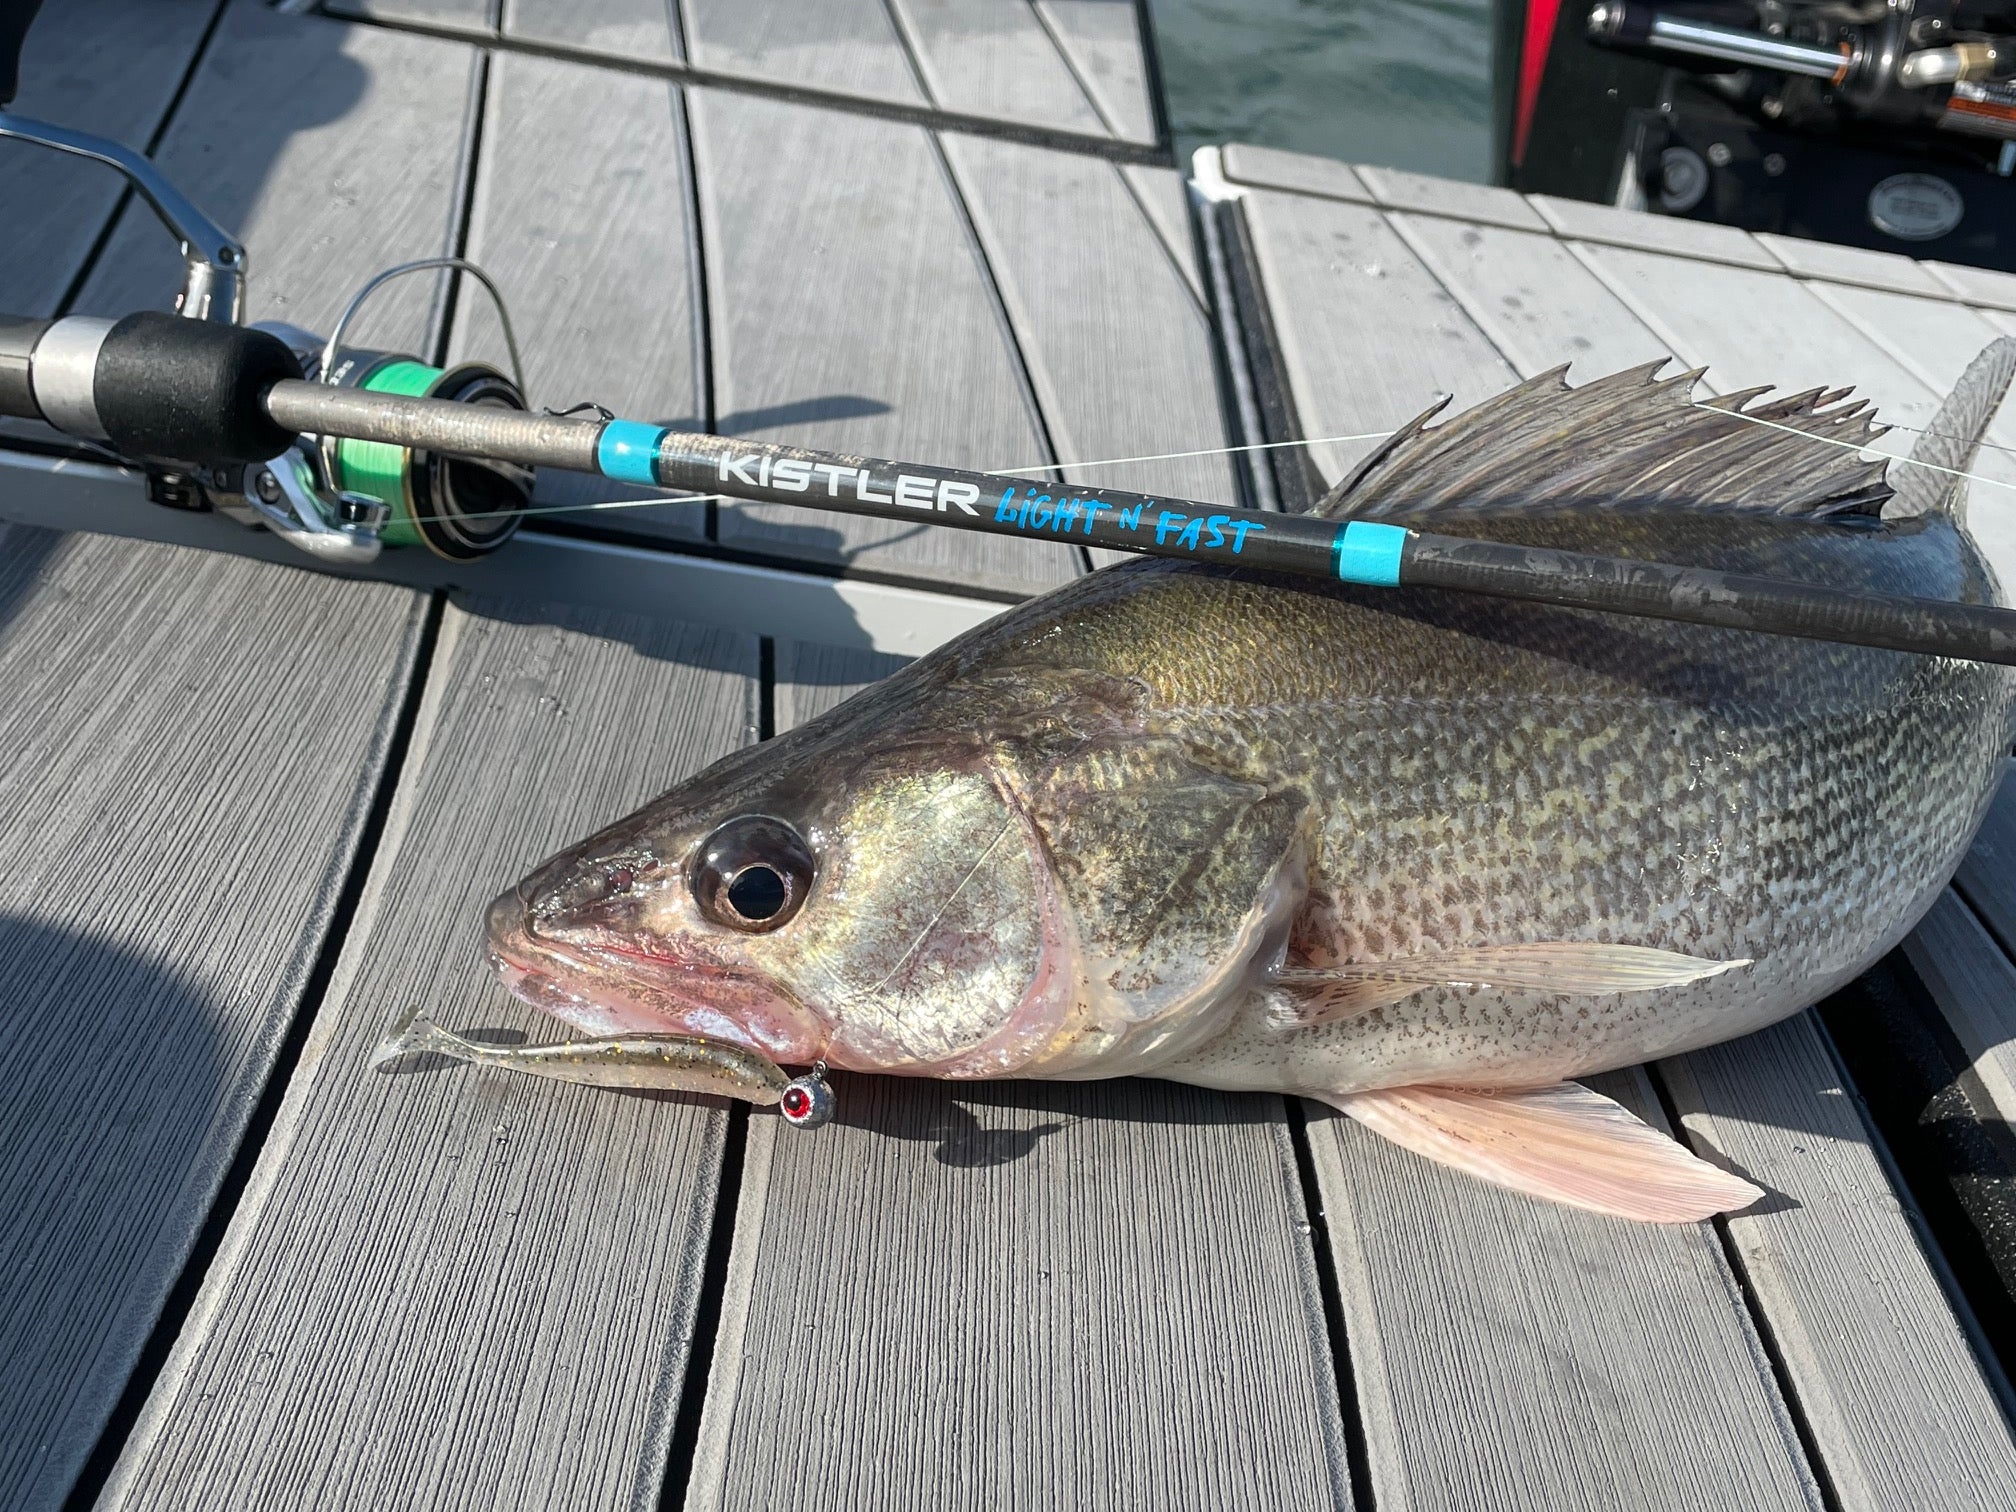 How To Choose The Right Walleye Rod - Why This ALL-PURPOSE Rod